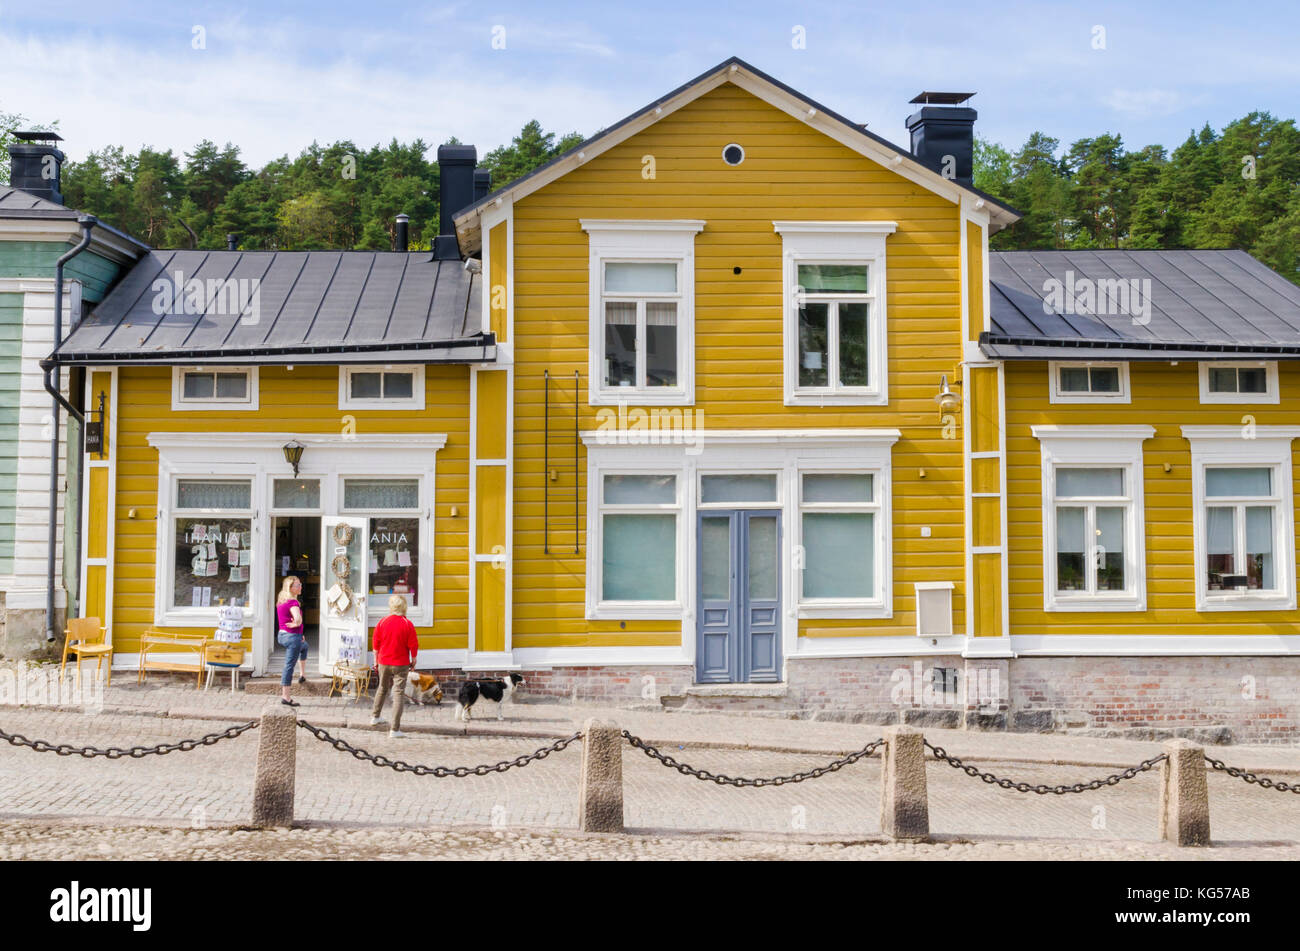 Colorful old town wooden building housing a shop, in Porvoo, Finland Stock Photo